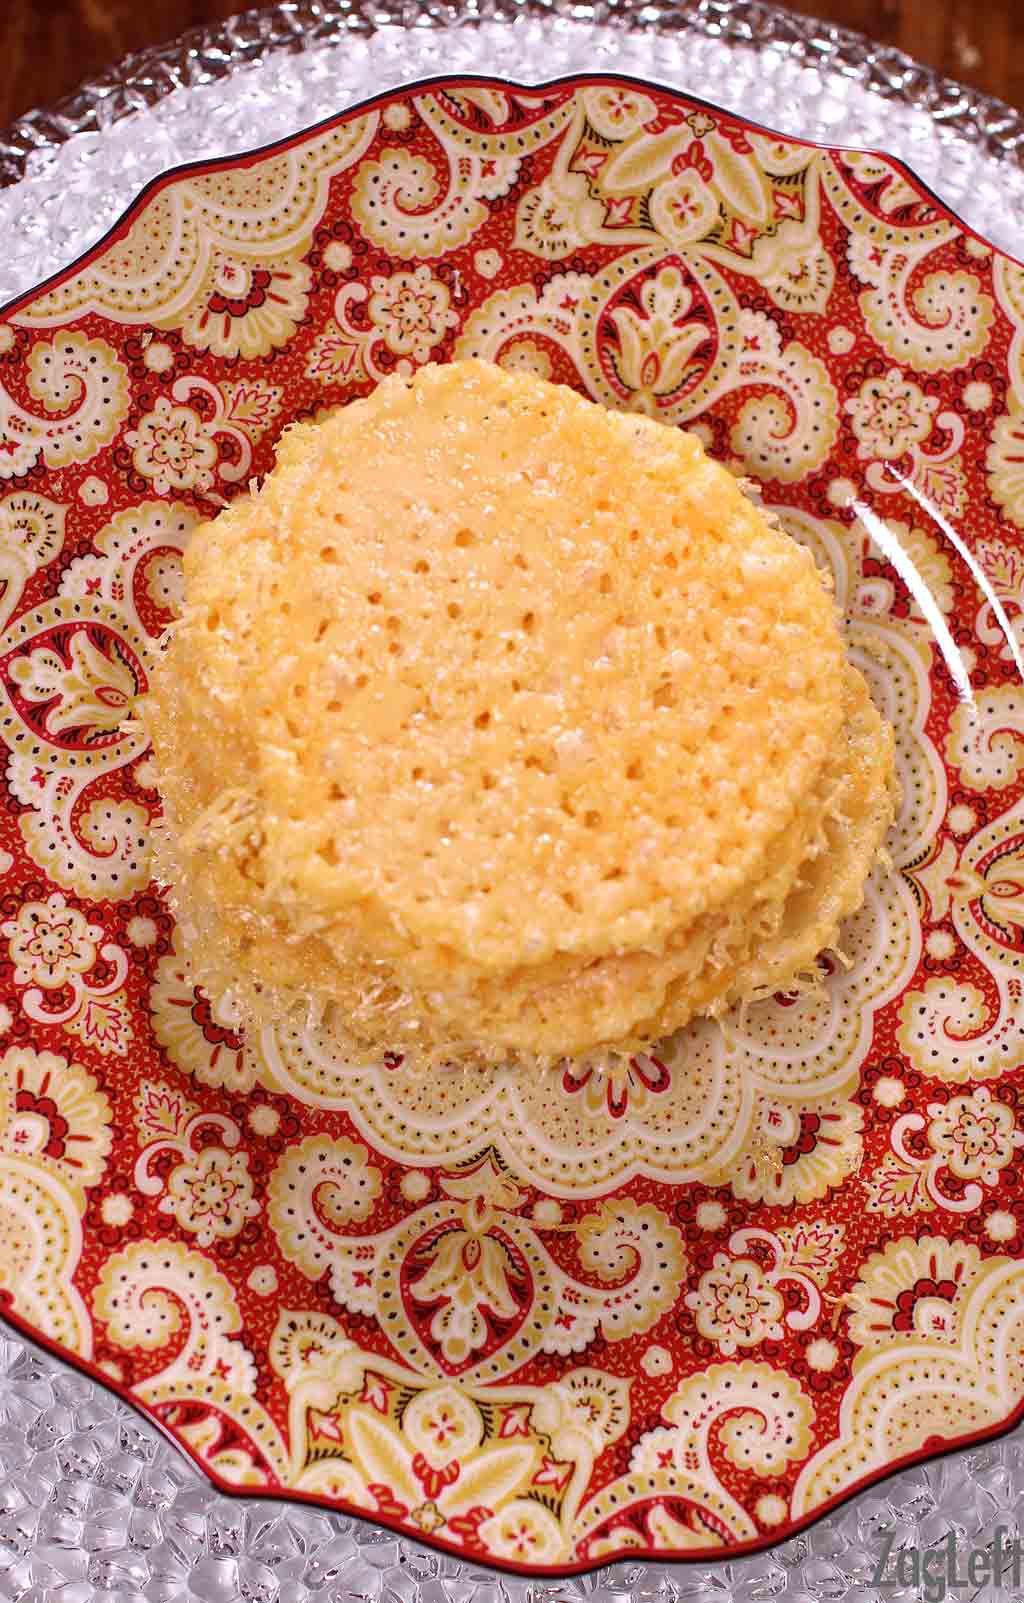 Parmesan cheese crisps stacked on a plate.